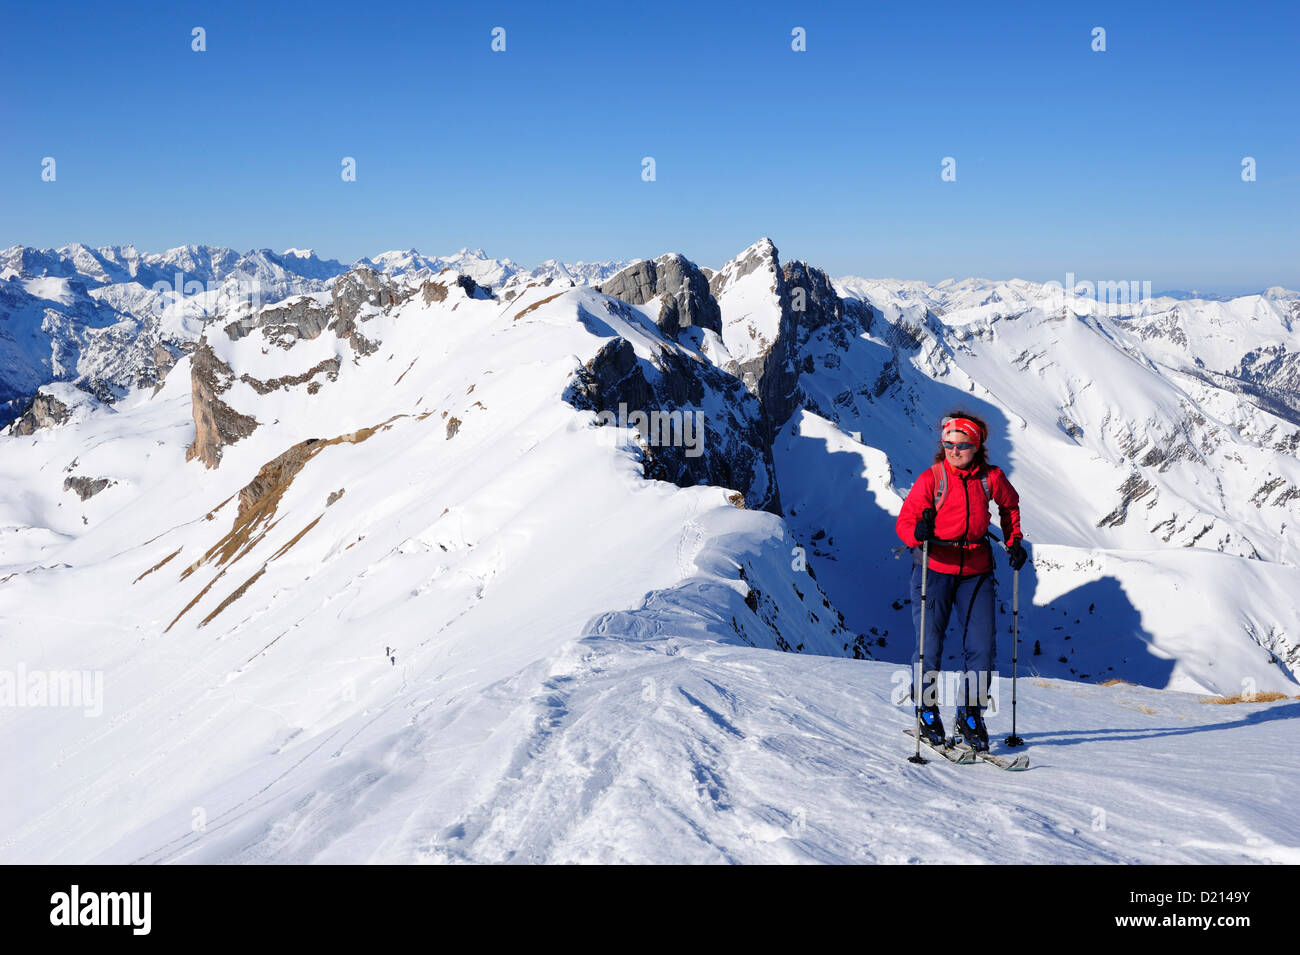 Woman with crosscountry skis ascending to Rofanspitze, Seekarlspitze, Hochiss and Karwendel range in the background, Rofanspitze Stock Photo